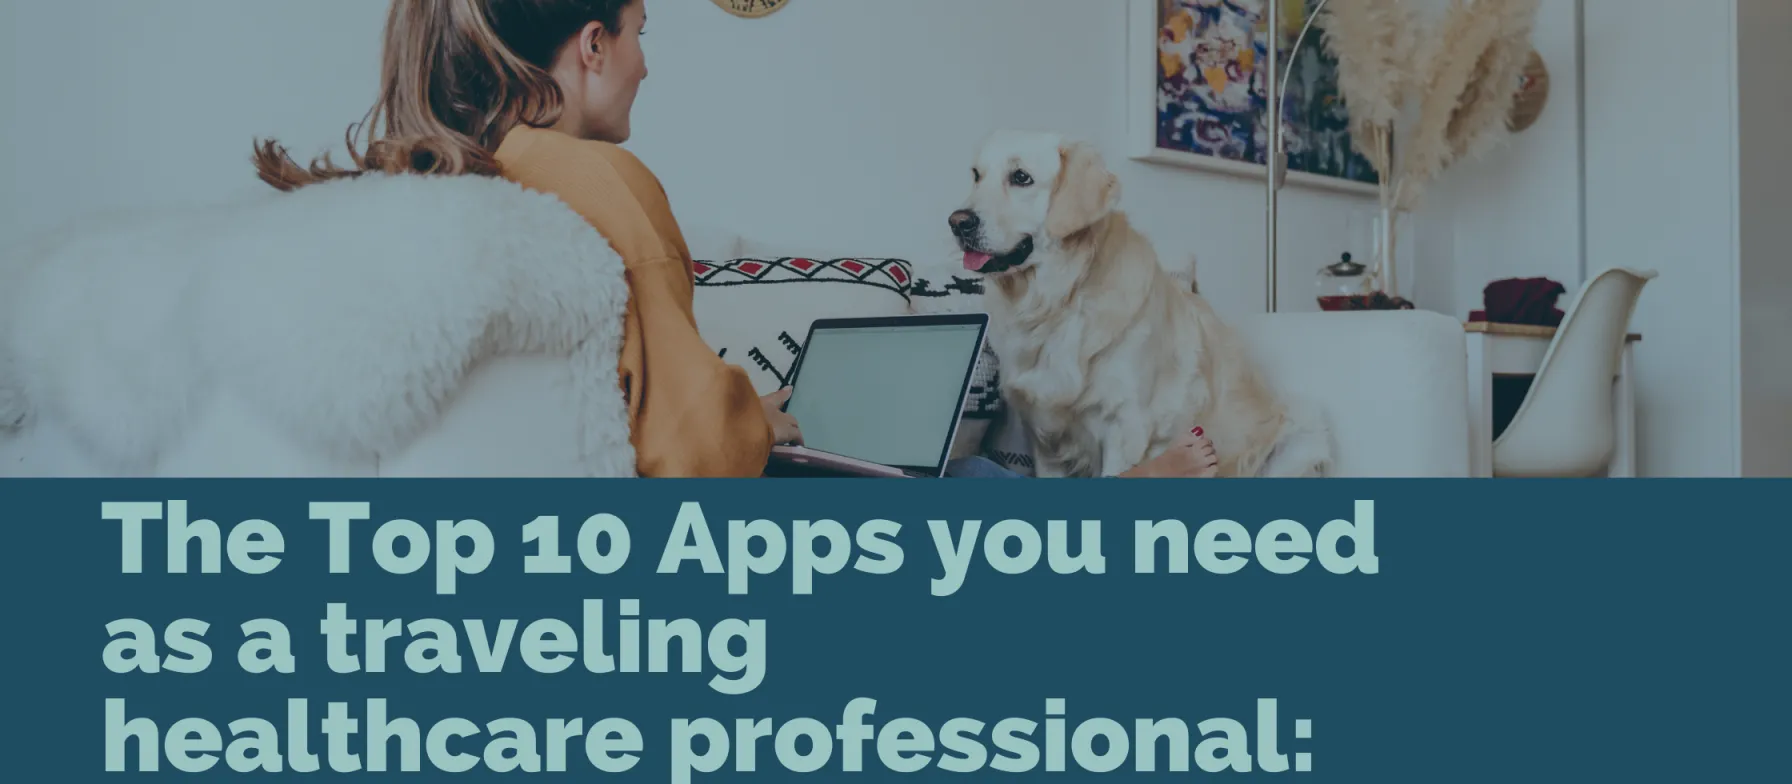 GetMed shares top 10 apps for Traveling Healthcare Professionals 